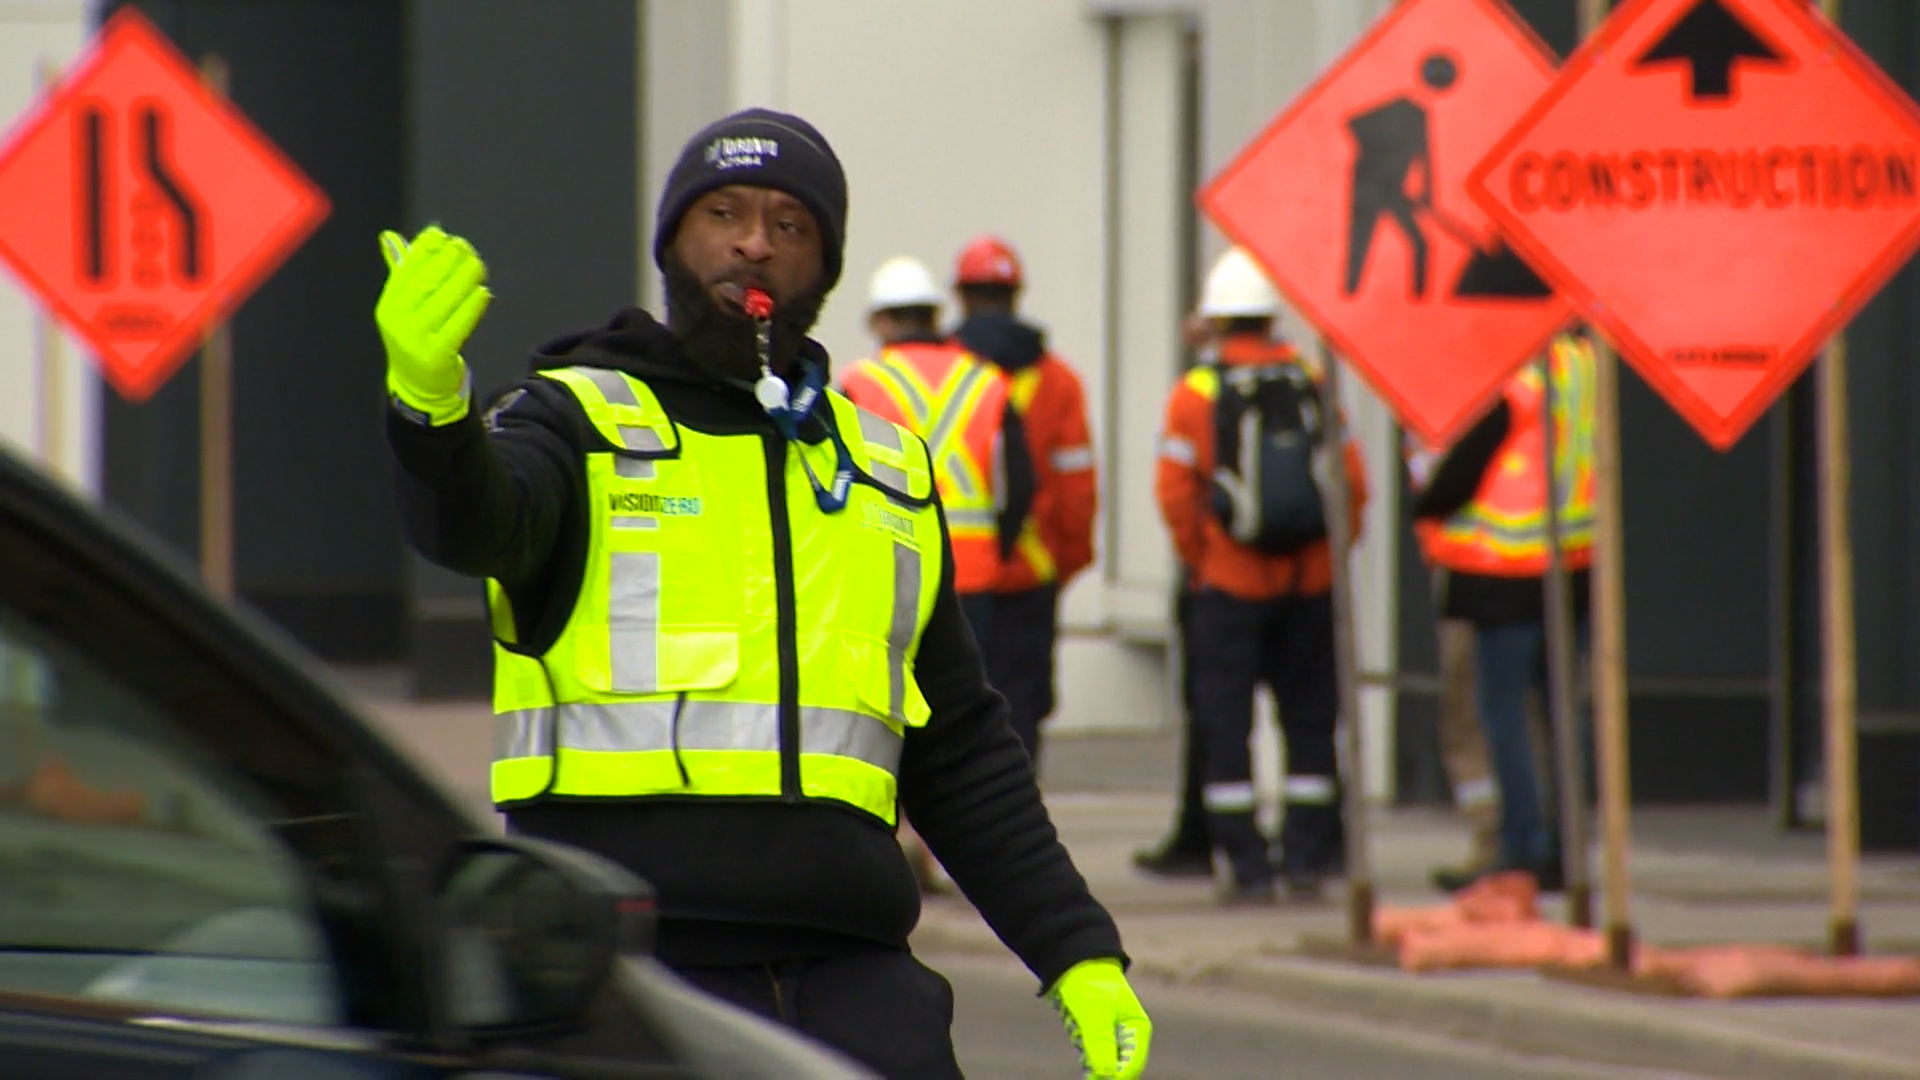 Traffic agents cost Toronto thousands every week. Why does the city need them?